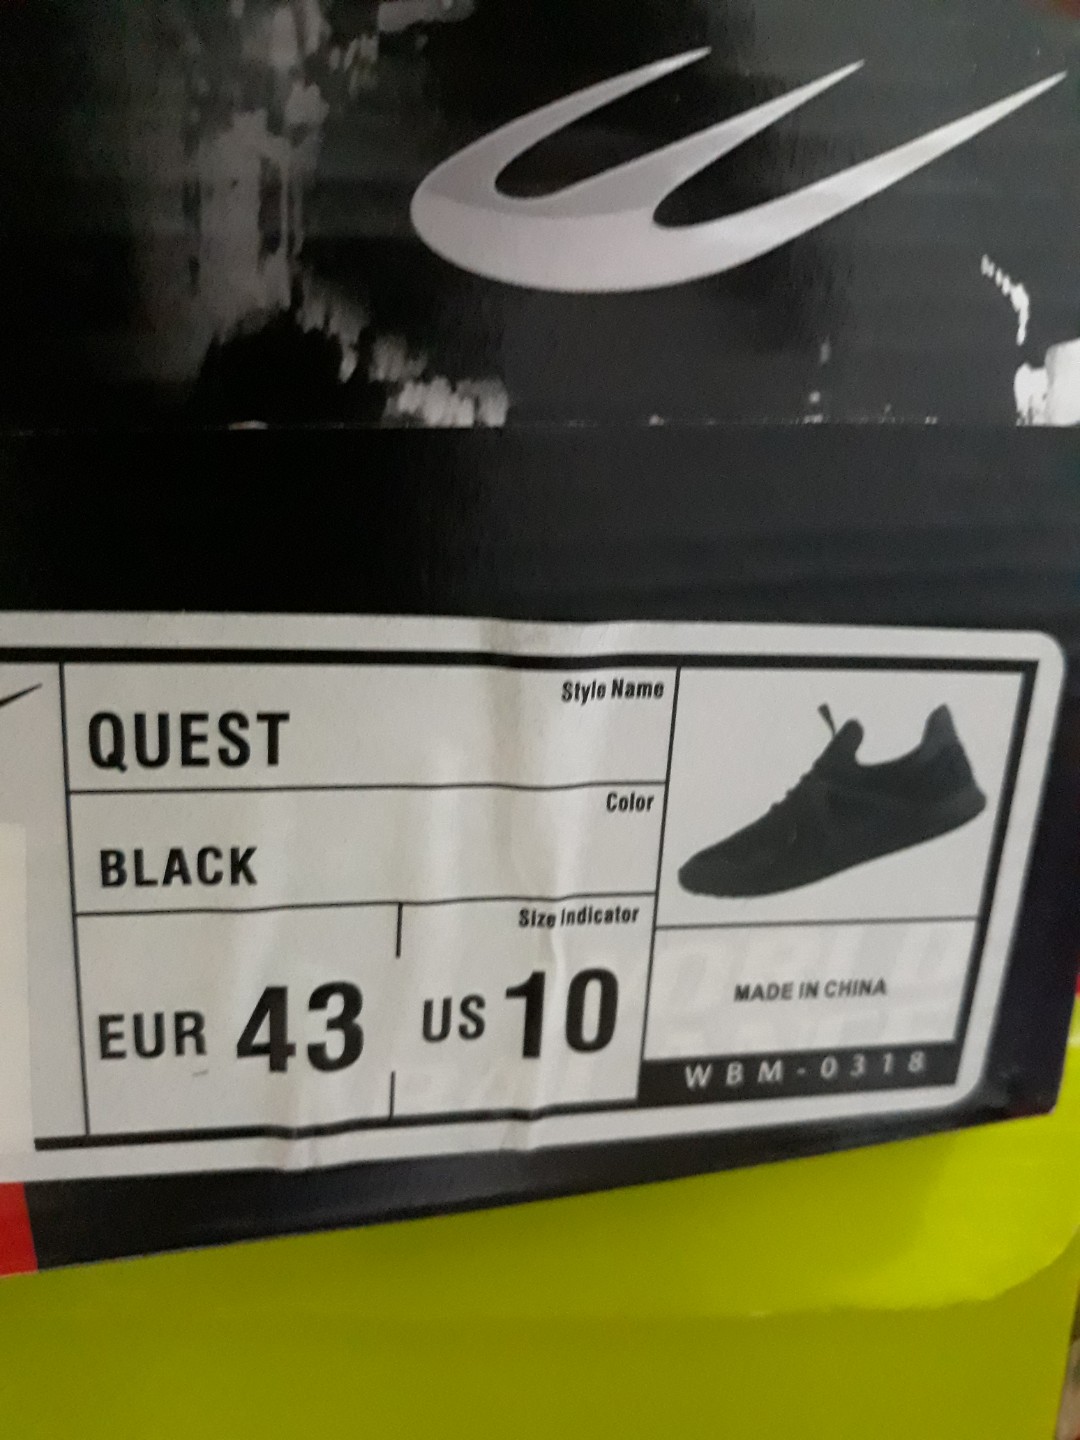 43 to us size shoe